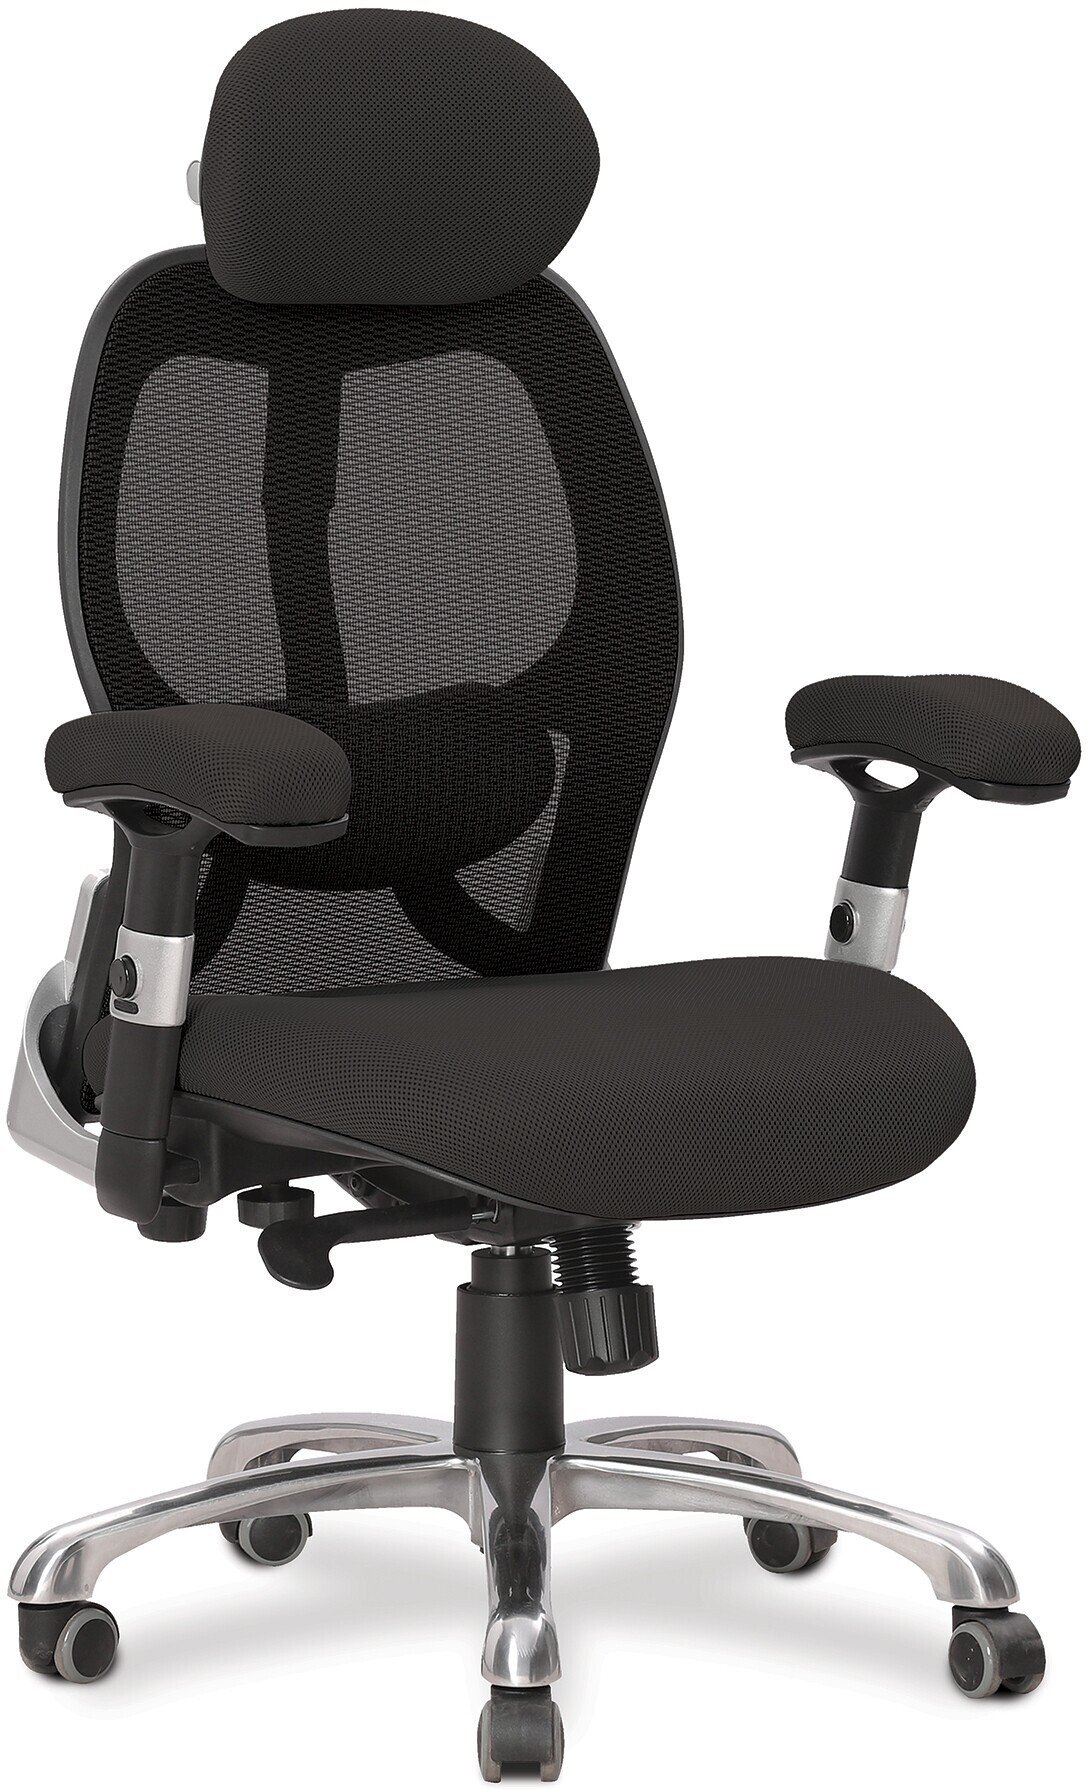 Chair for Offices